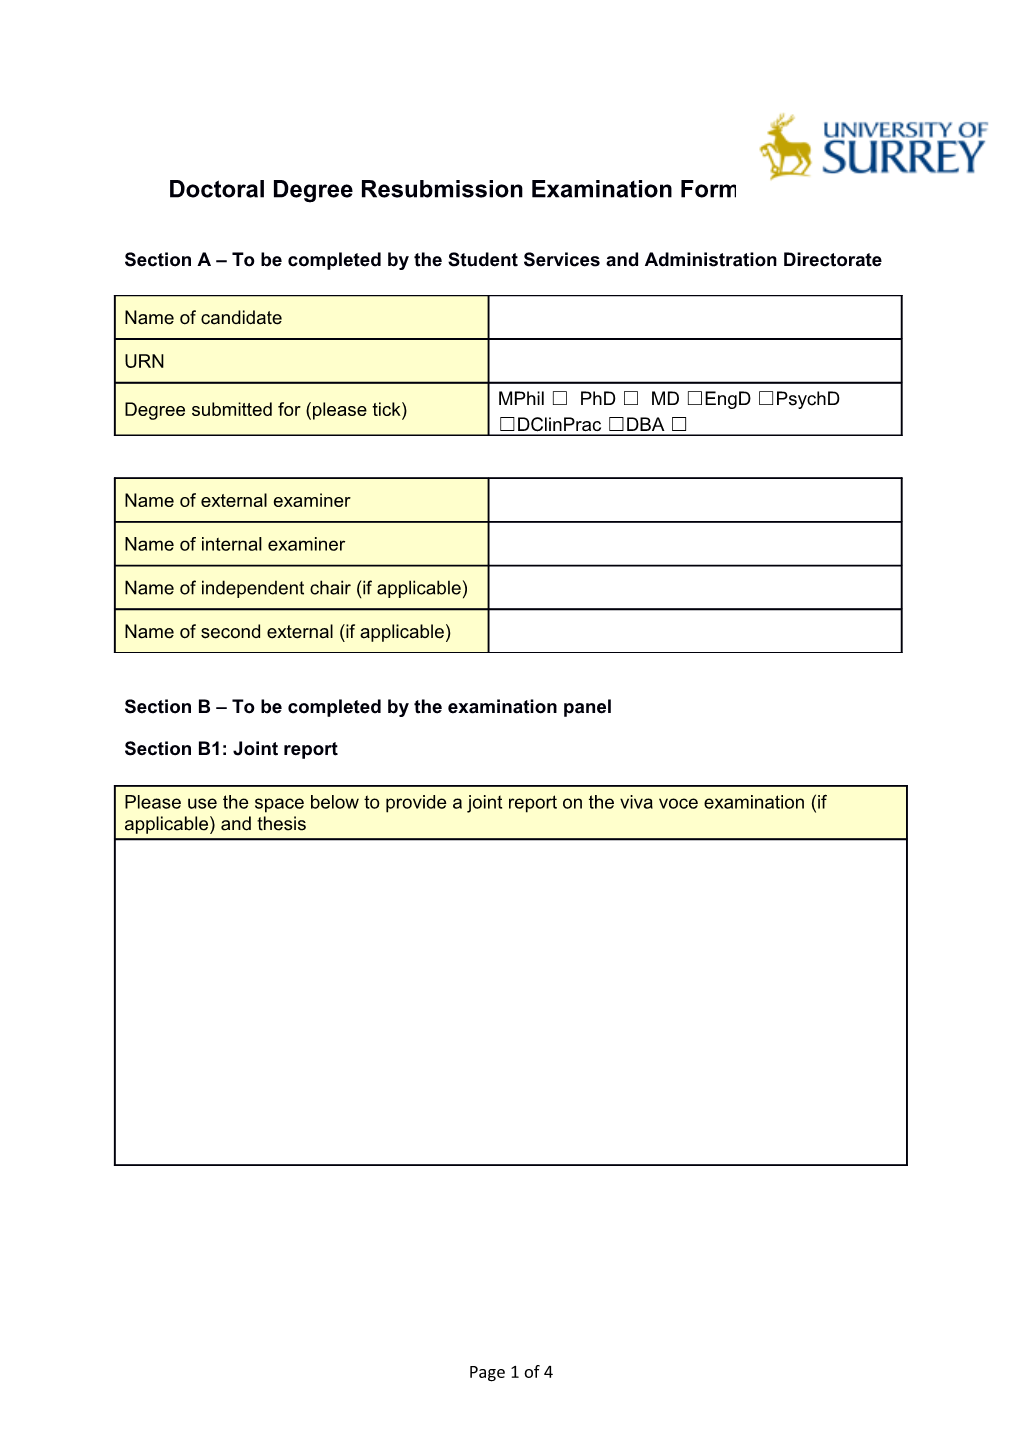 Doctoral Degree Resubmission Examination Form 2017/18